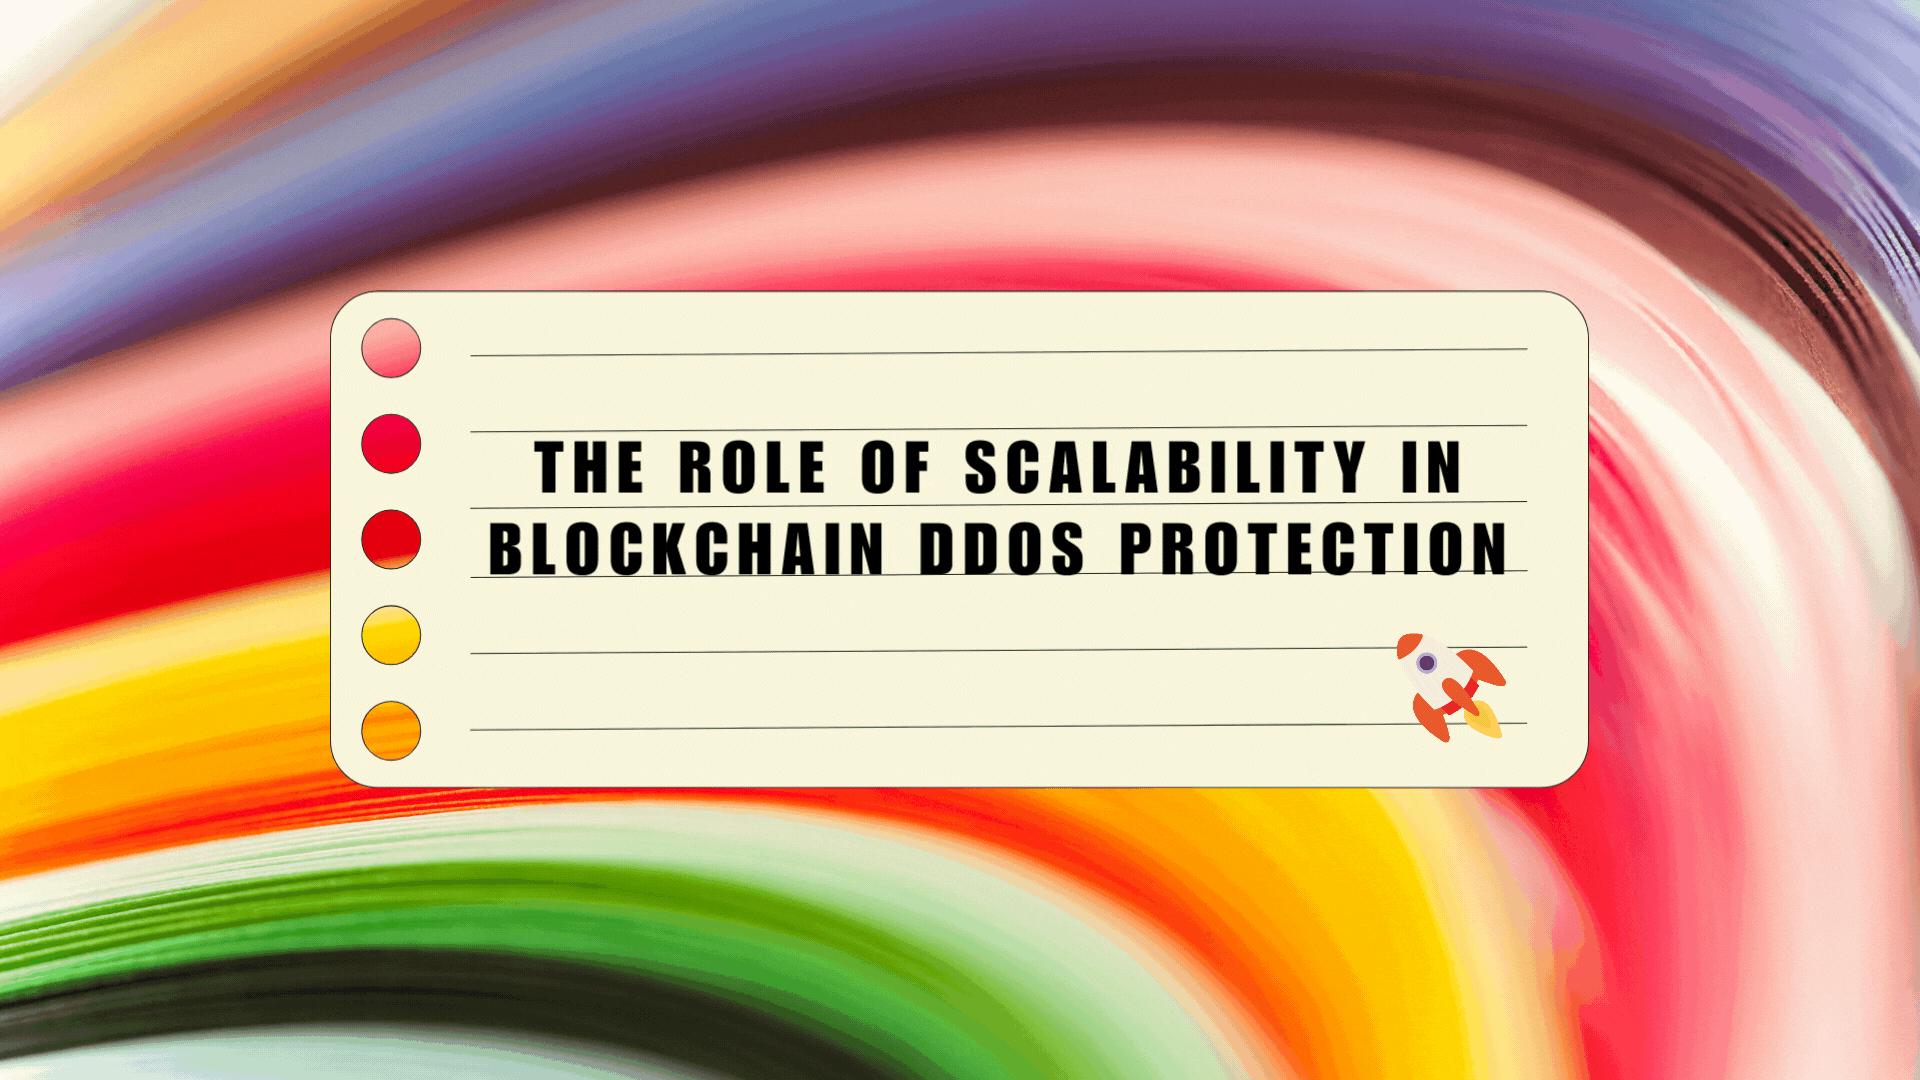 The Role of Scalability in Blockchain DDoS Protection